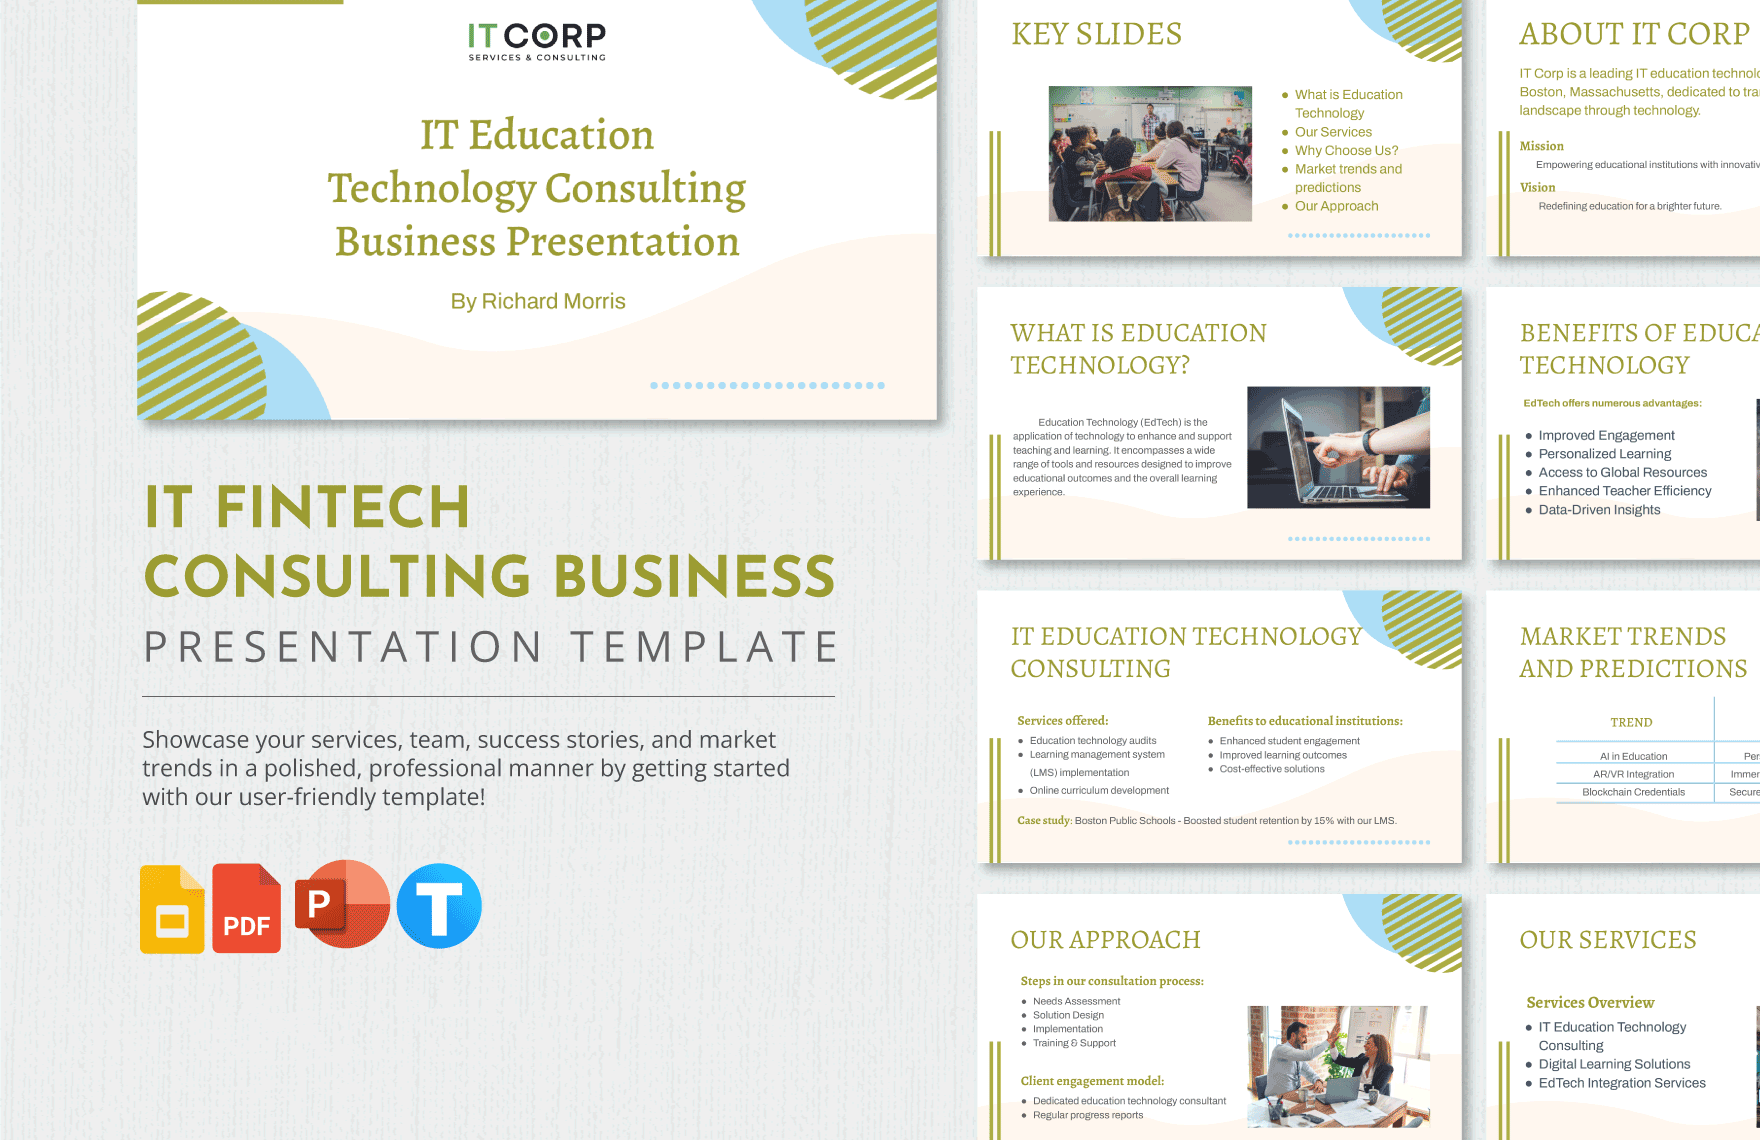 IT Education Technology Consulting Business Presentation Template